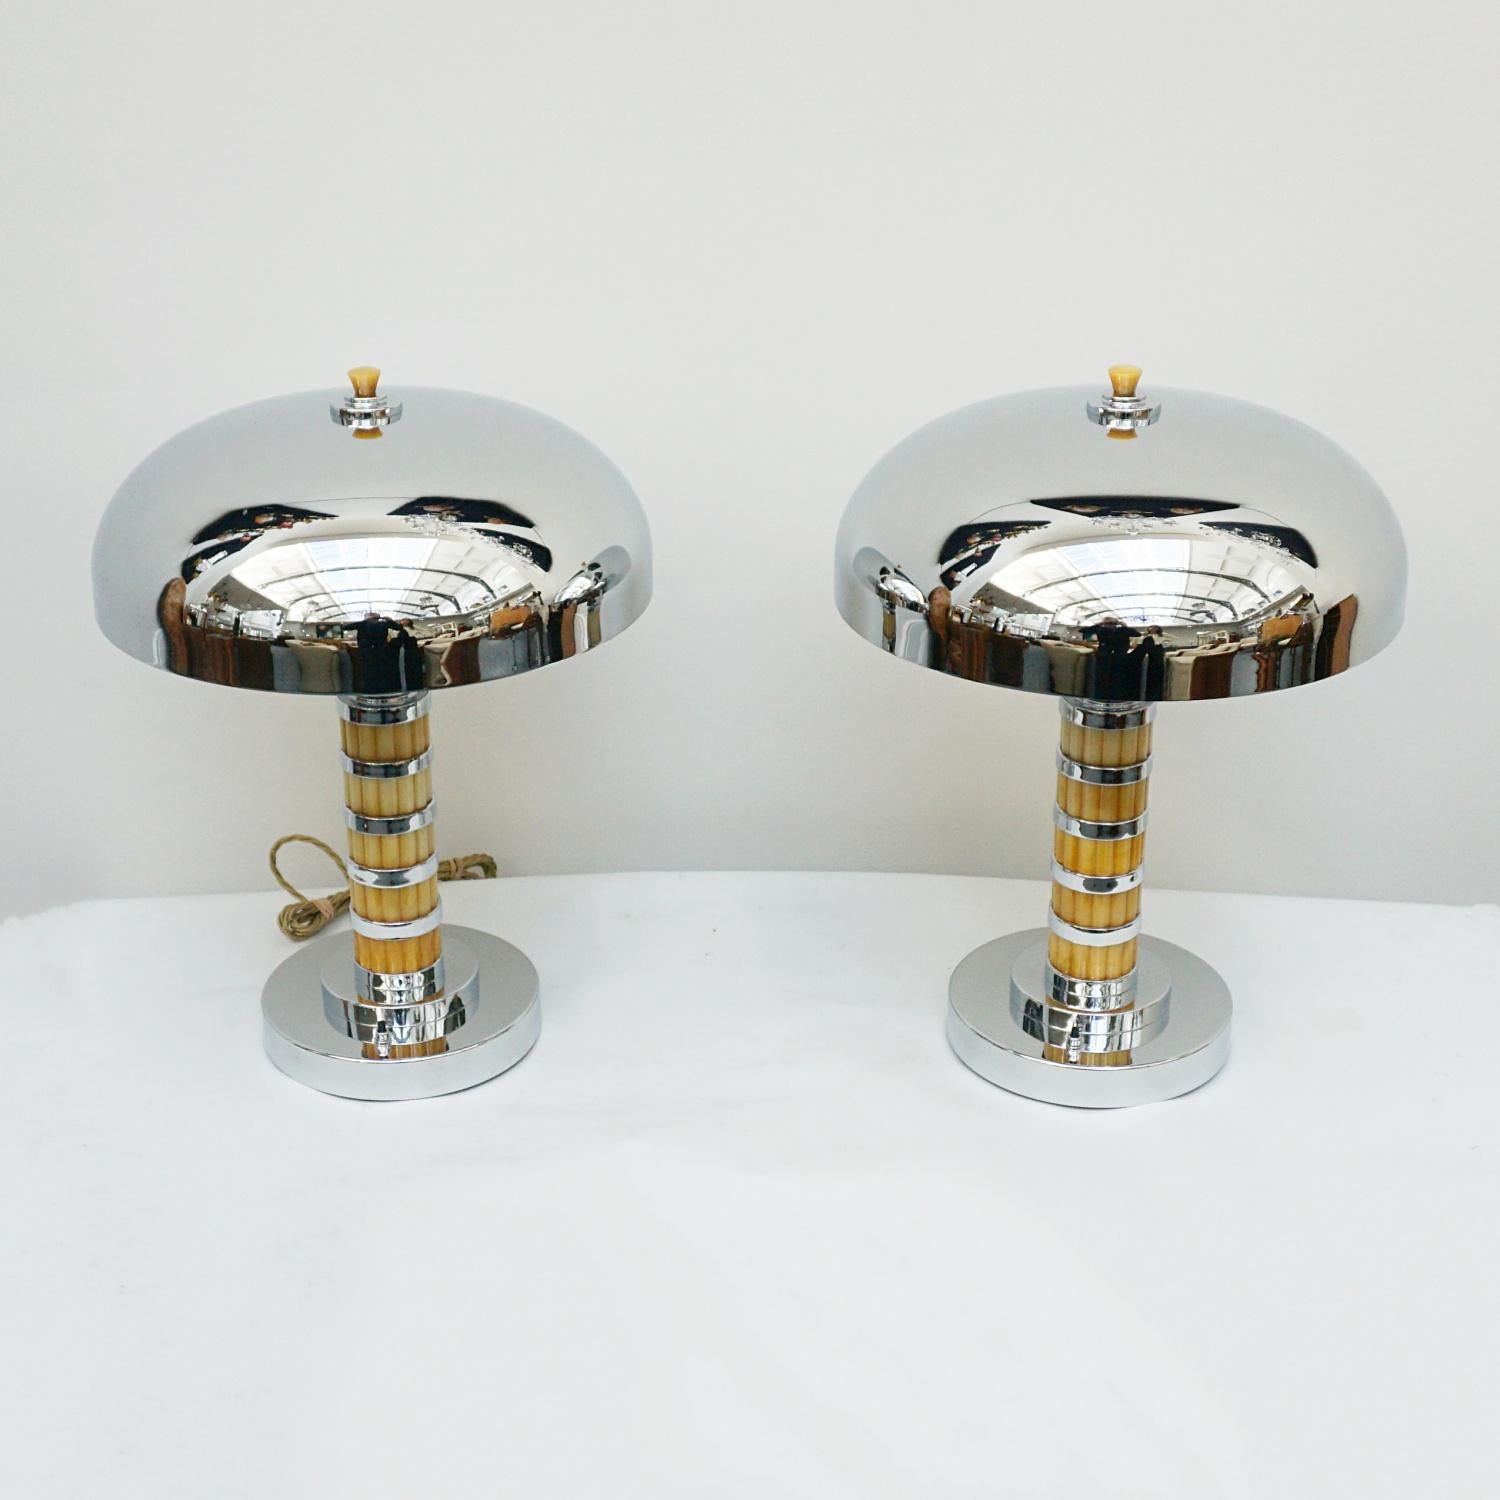 A pair of Bakelite and Chrome Dome Lamps. Rippled yellow bakelite with chromed banded stem over a chromed metal base and domed chrome shade. Yellow bakelite finial to top. 

Dimensions: H 48cm Diameter of Shade: 37cm, of base: 20cm

Item Number: